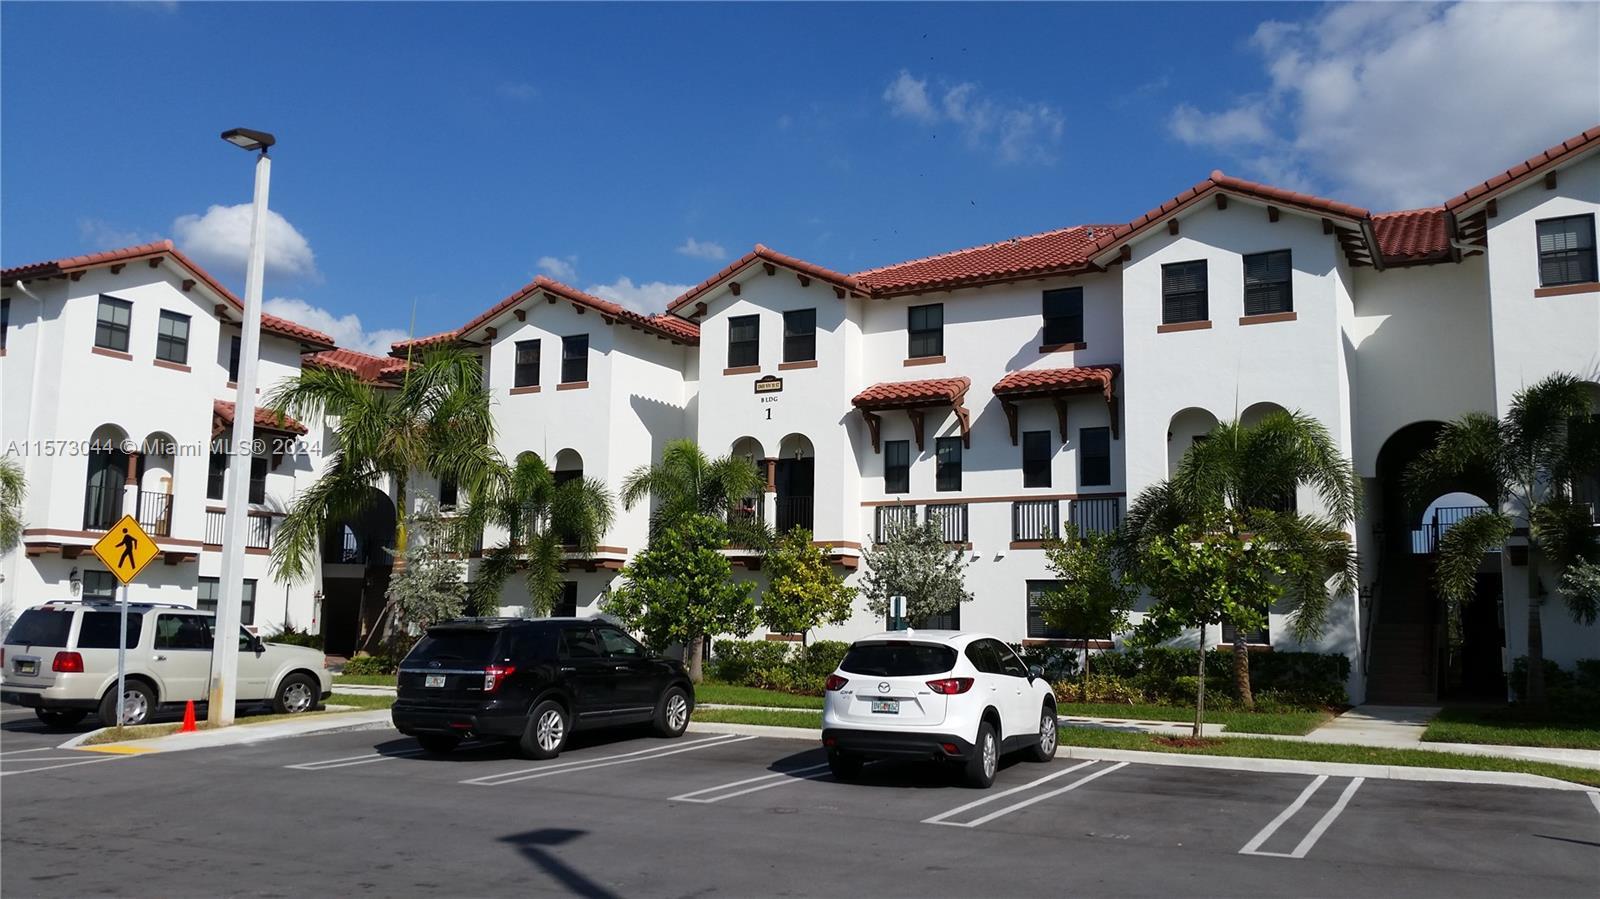 Photo of 10600 NW 88th St #218 in Doral, FL